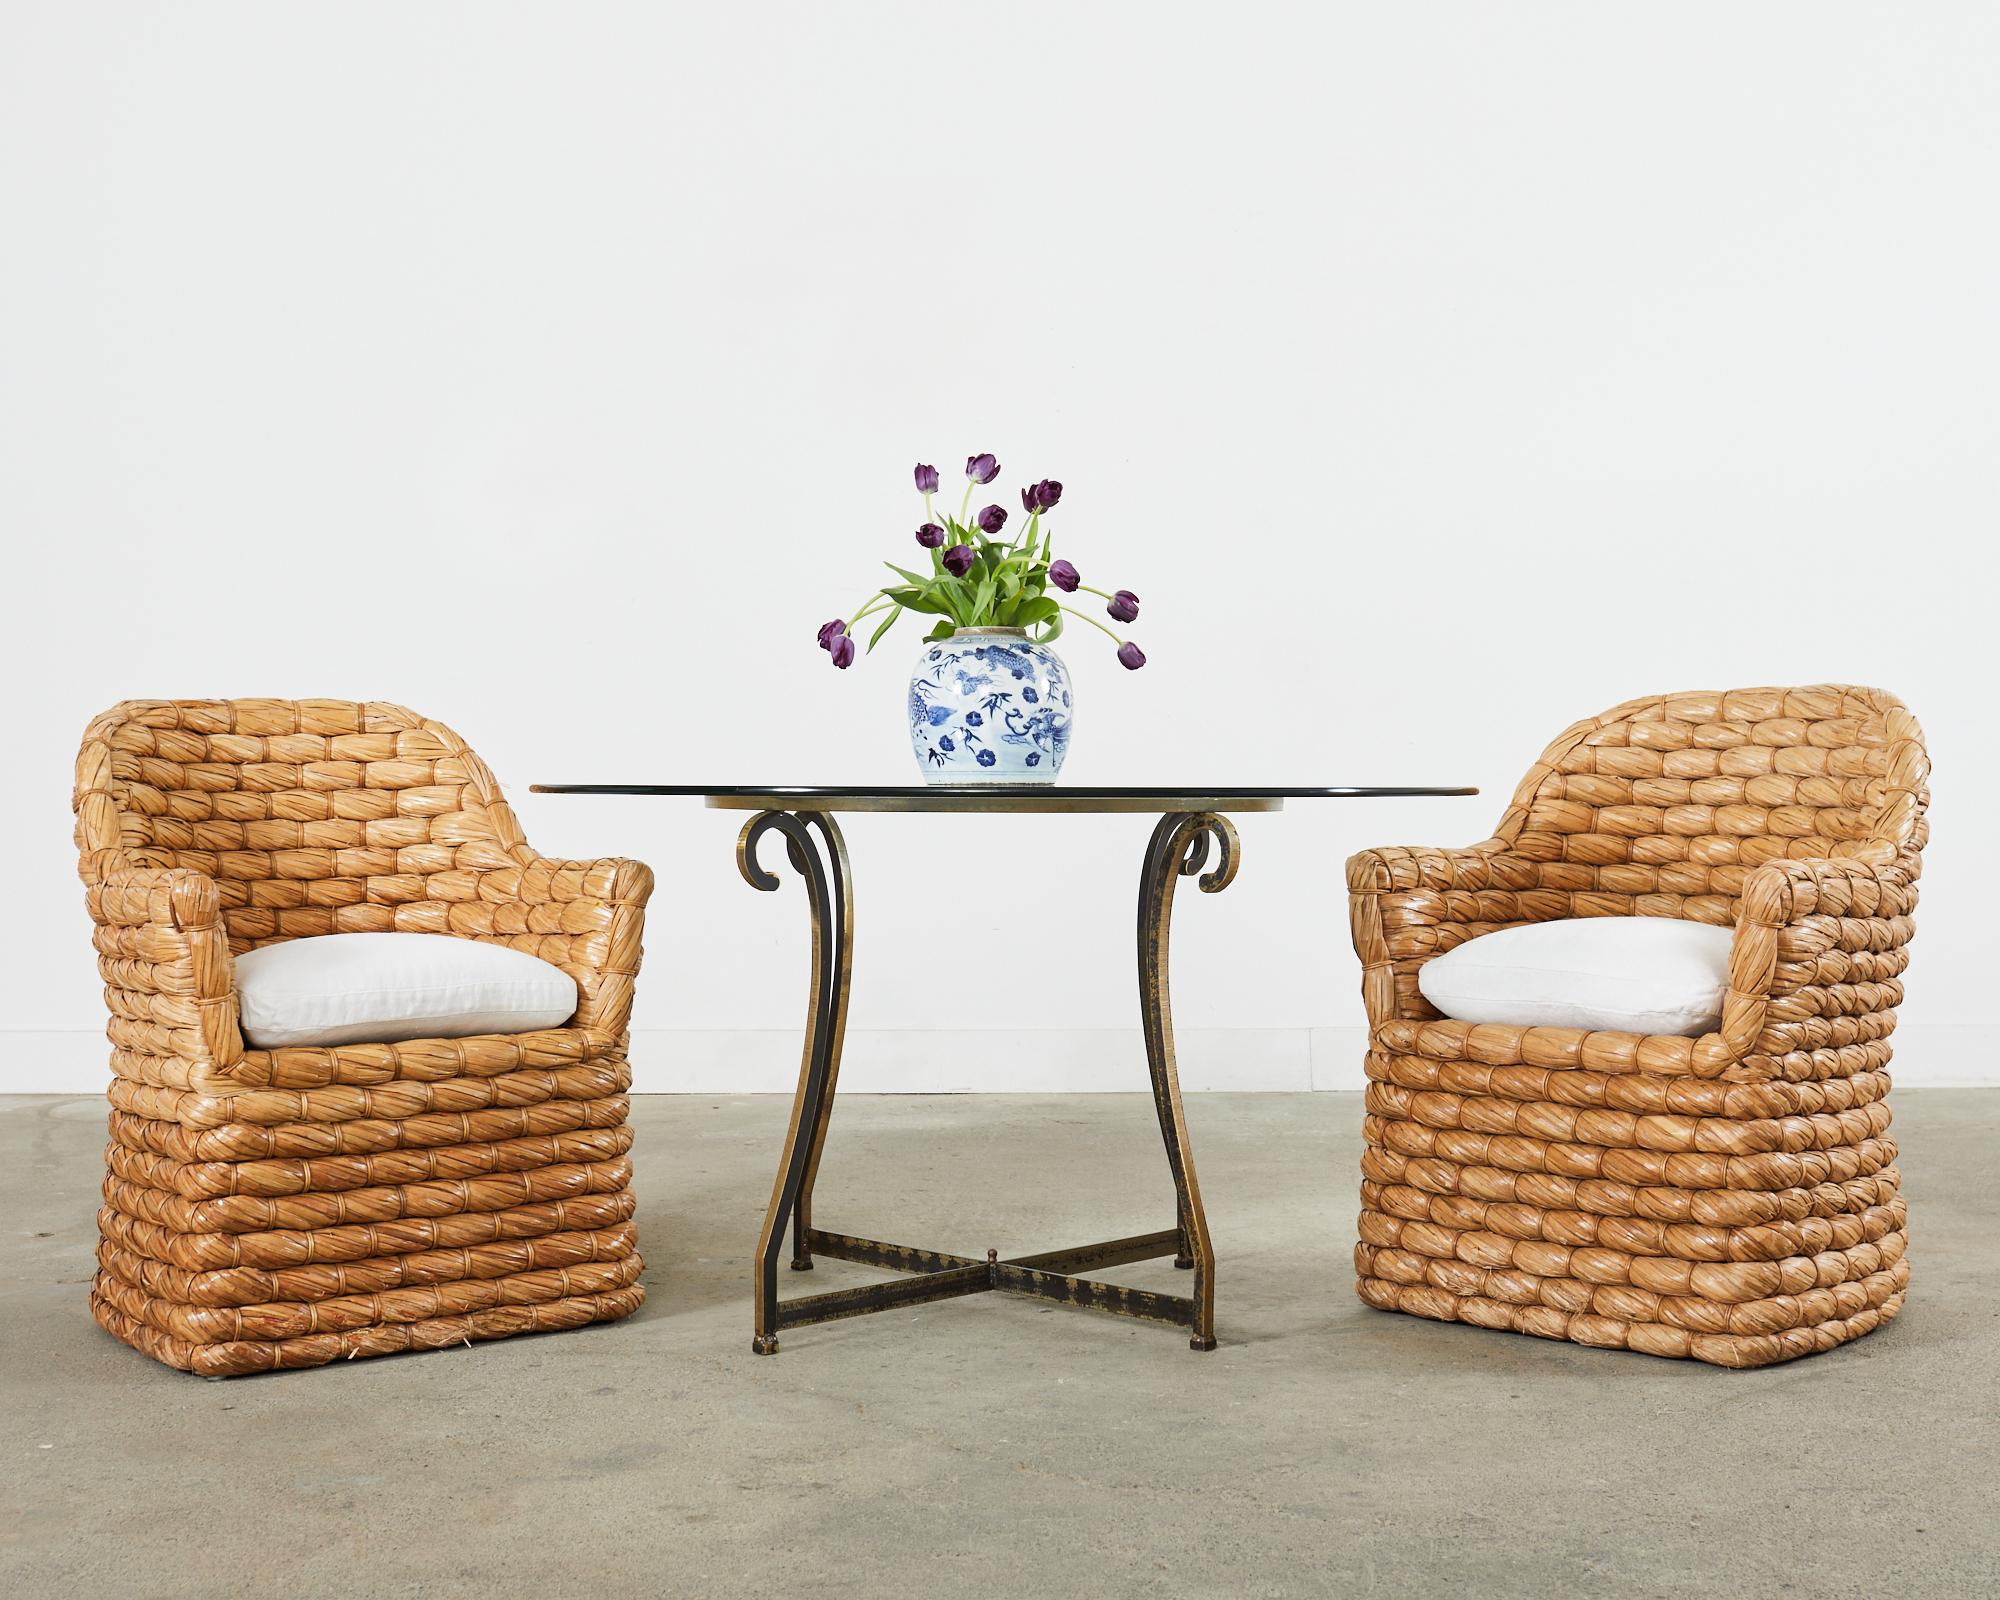 Amazing set of six woven Lampakanay or seagrass dining chairs or armchairs designed by Ralph Lauren. The iconic Joshua tree chairs feature a a rattan frame covered with an abaca hemp style thick rope. The leaves are braided together to form a large